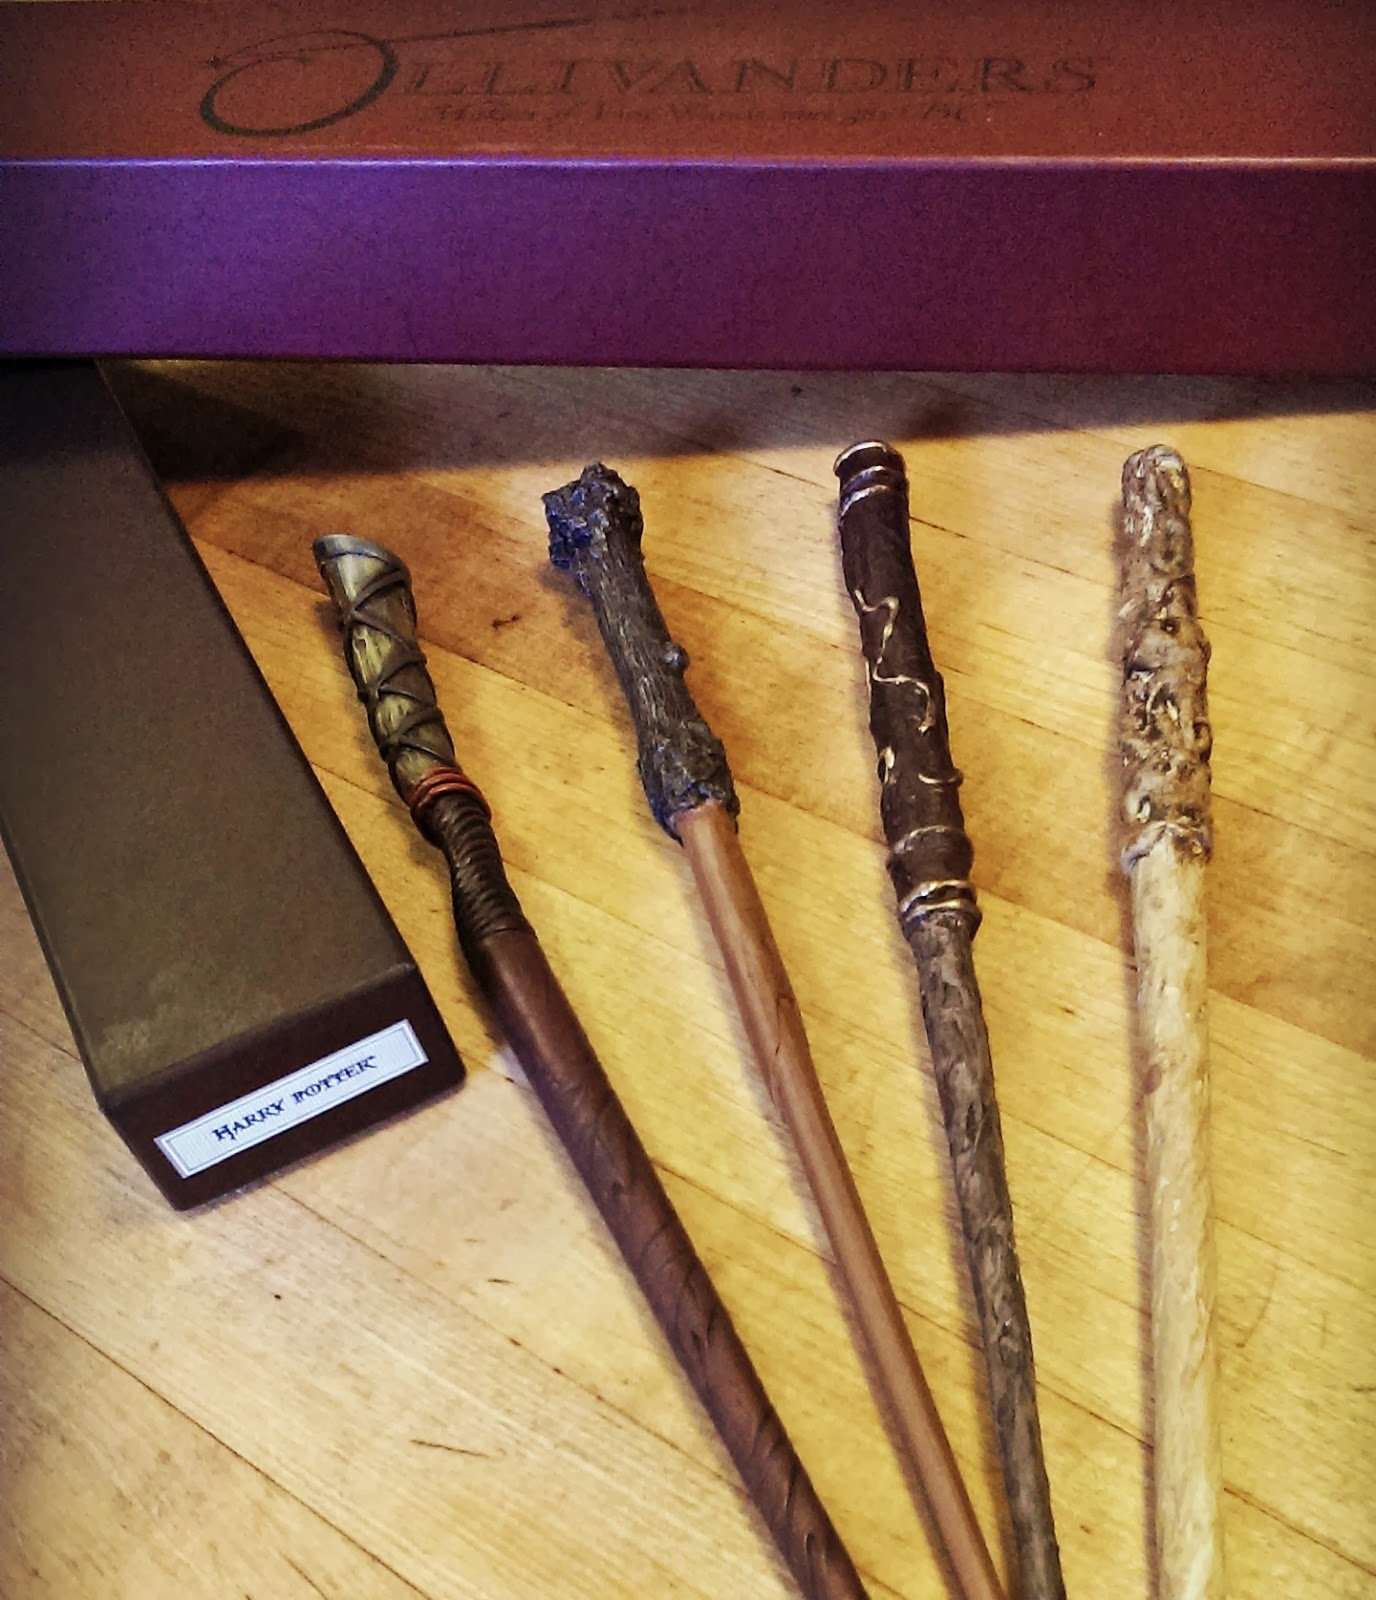 Finding BonggaMom: How to Make a Homemade Harry Potter Wand